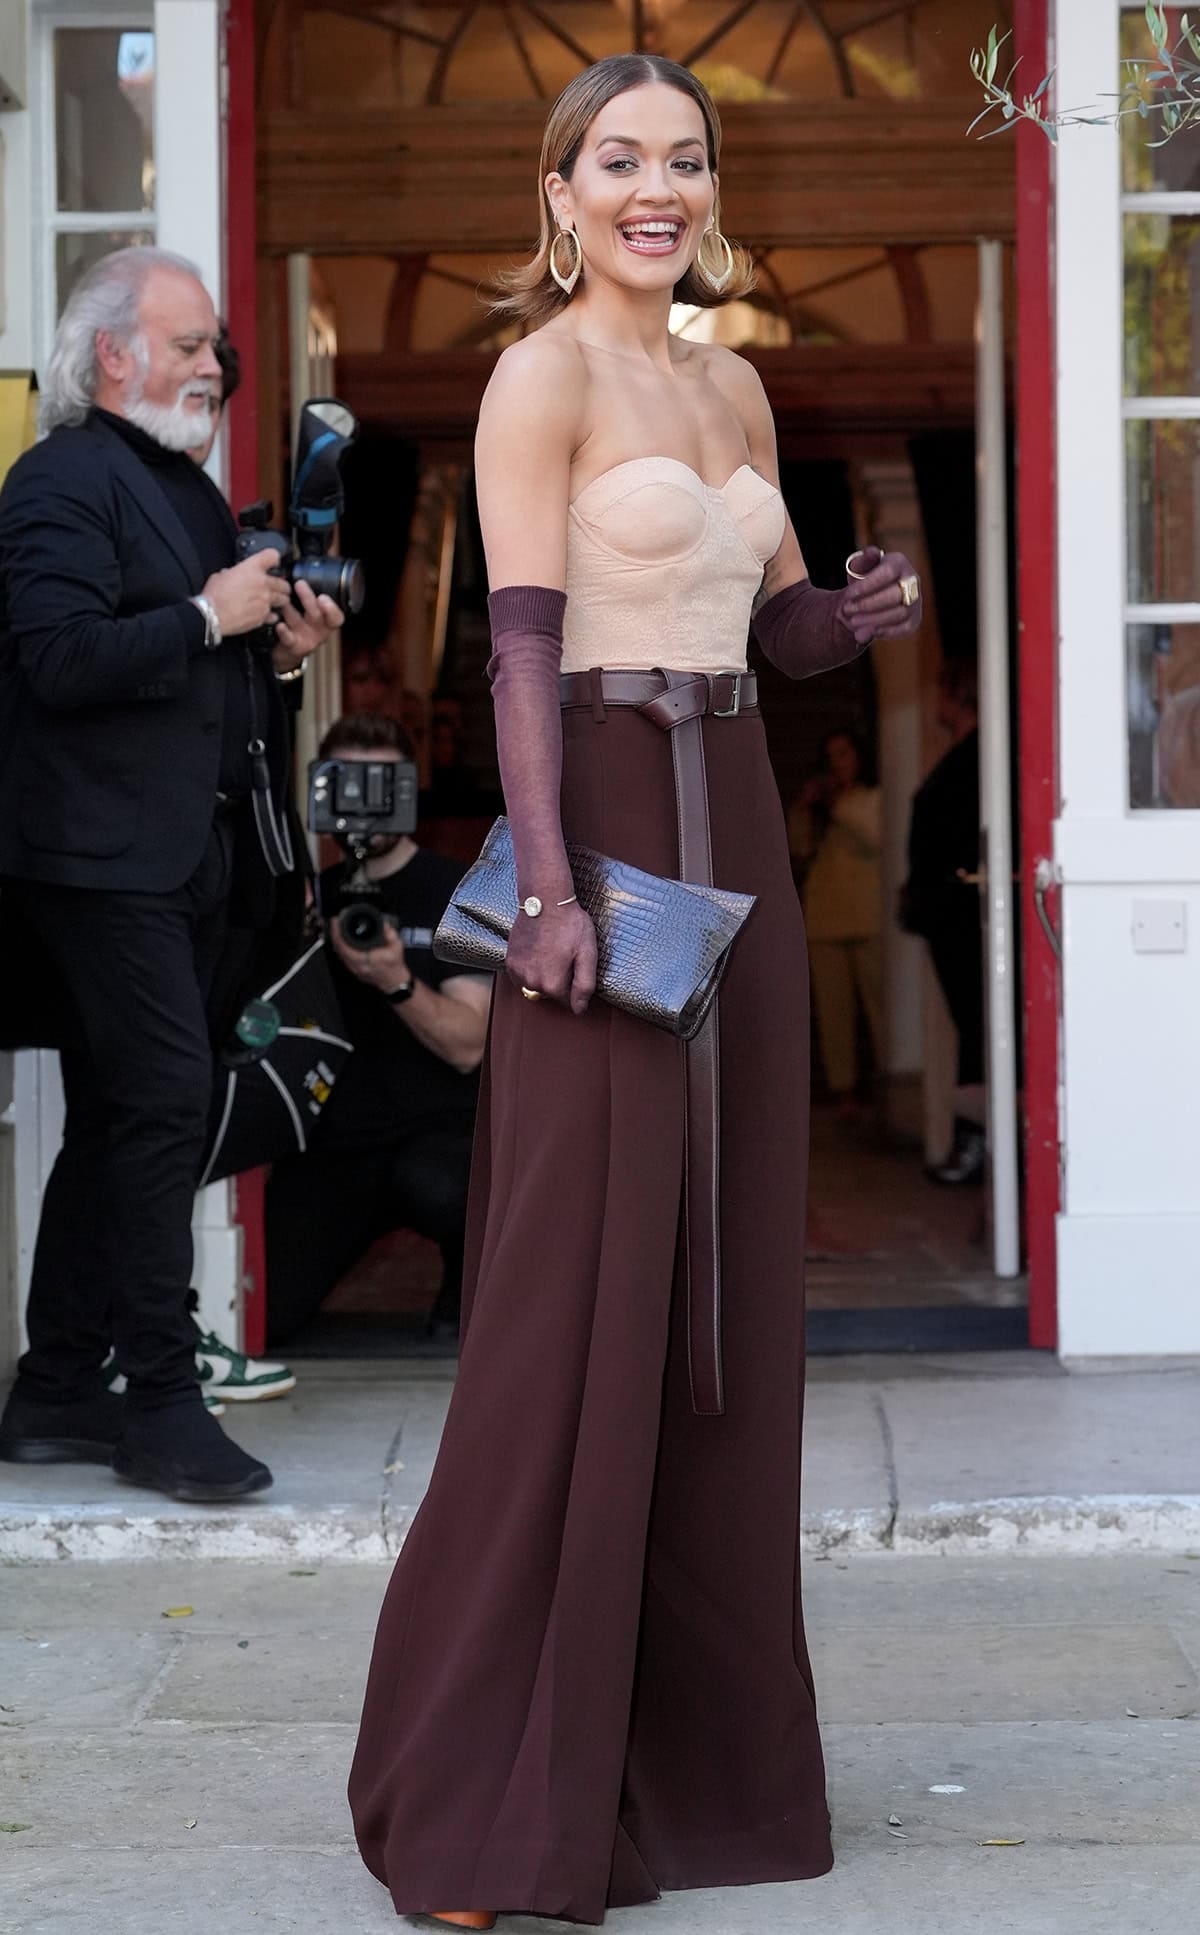 Rita Ora turns heads in a strapless nude corset top tucked into a pair of belted chocolate brown wide-leg pants